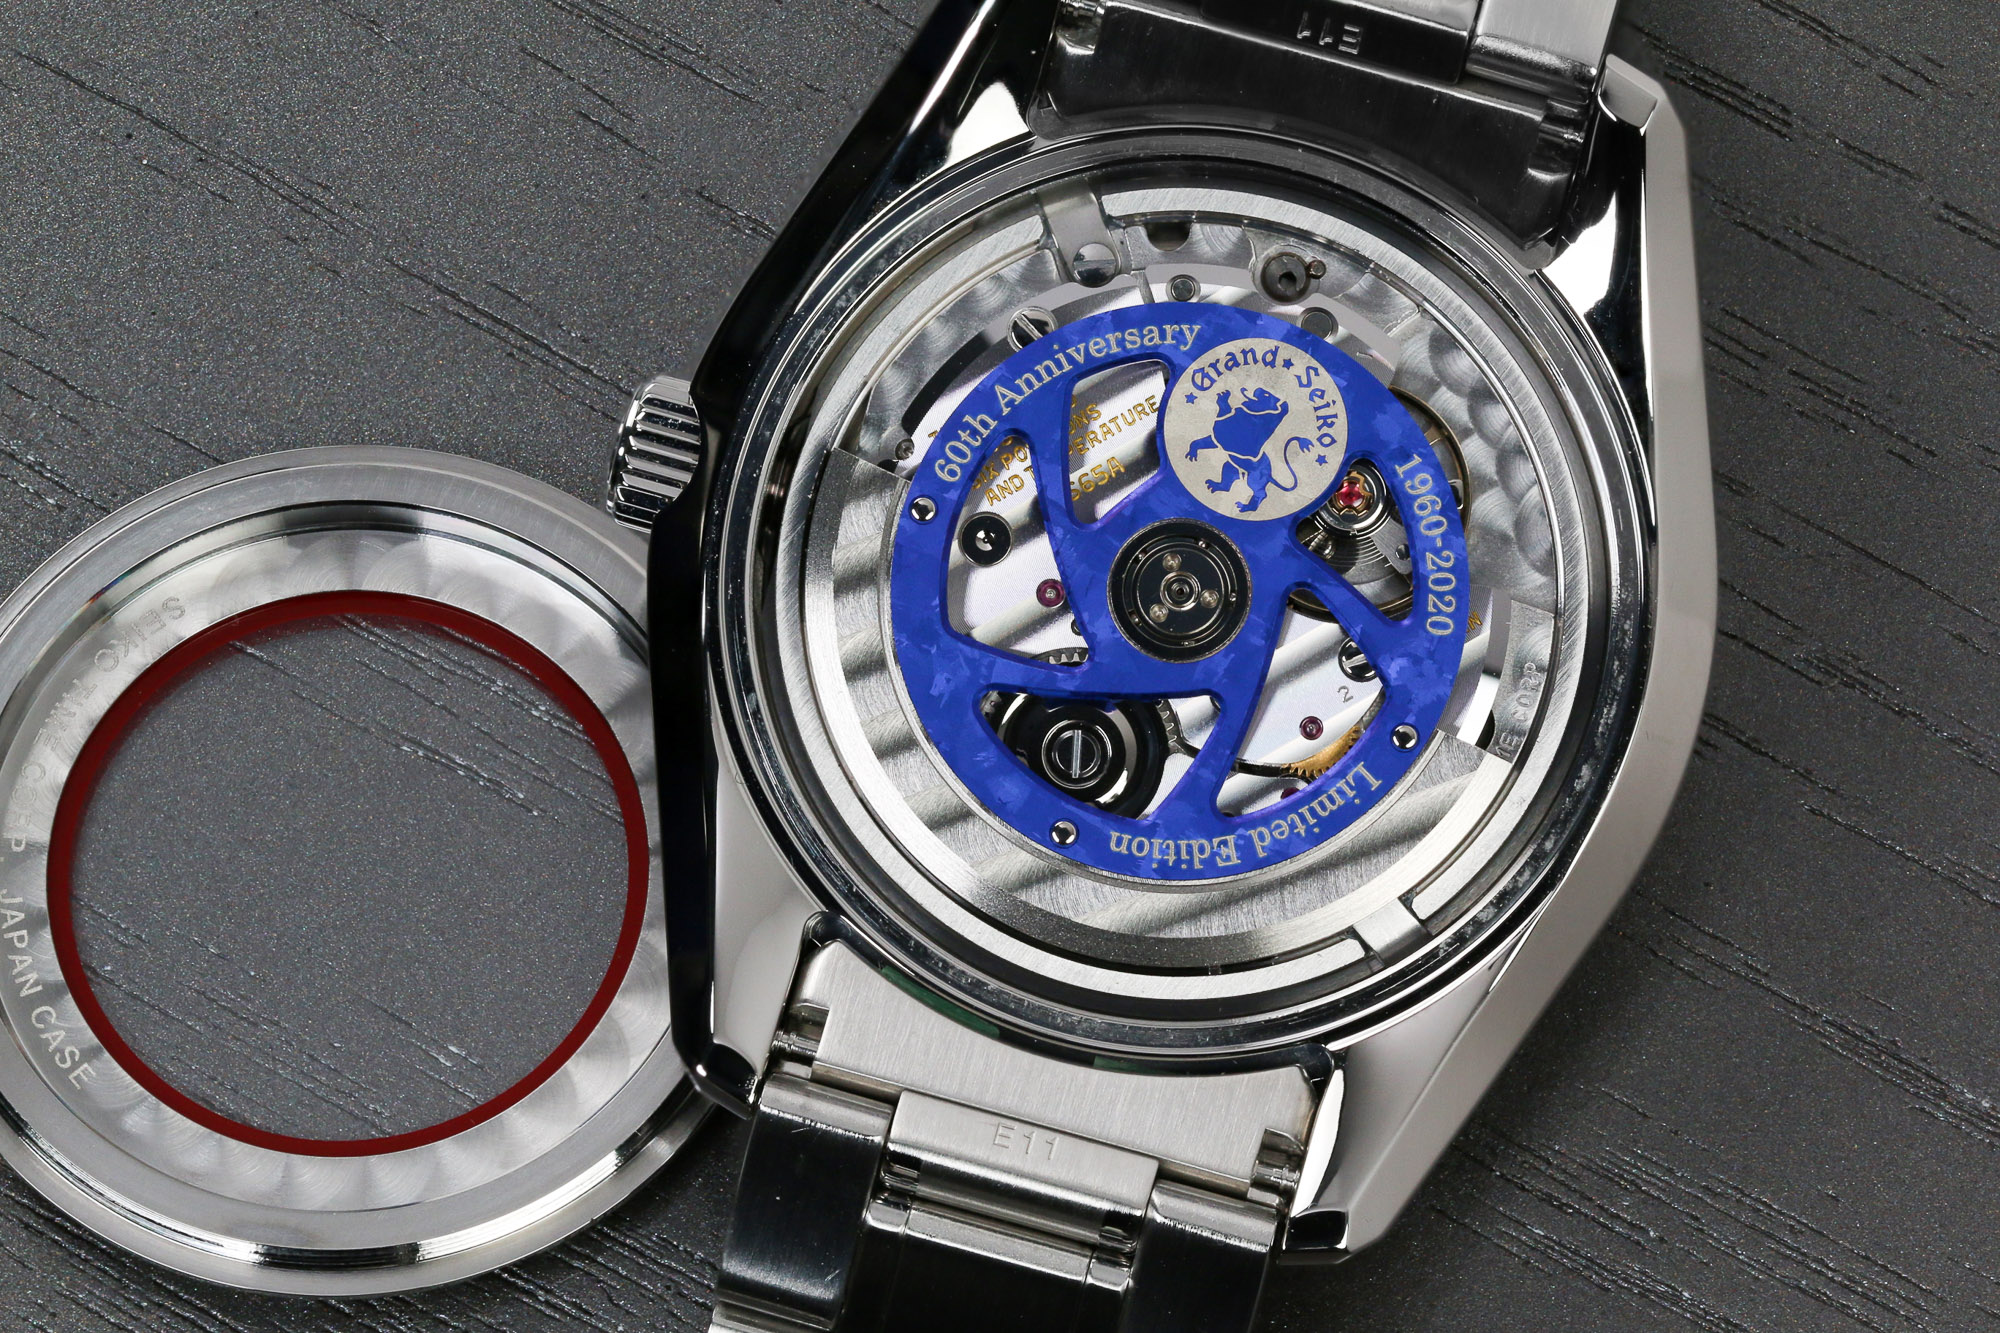 SBGR321 open case back with blue oscillating weight.